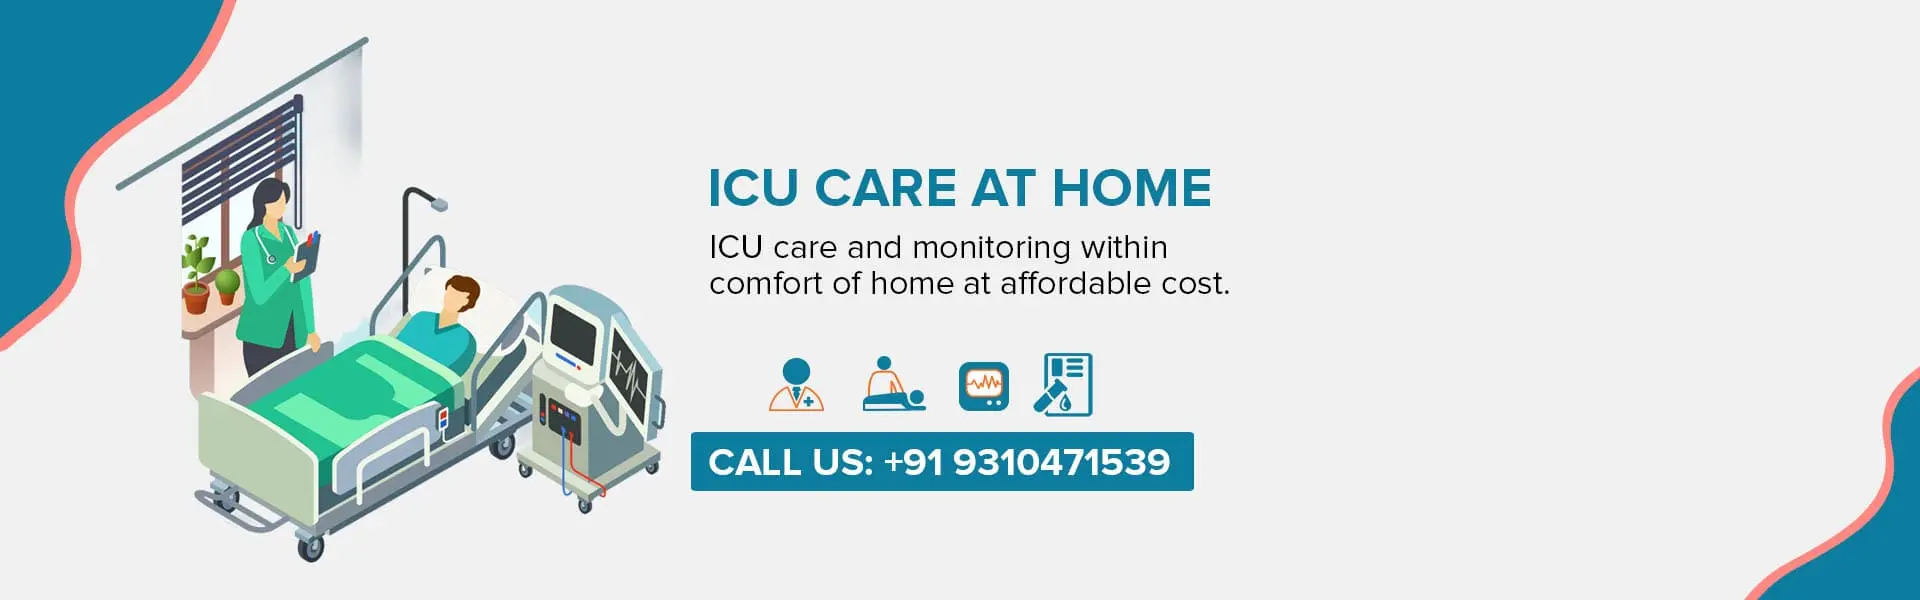 ICU care at home and services of benefits